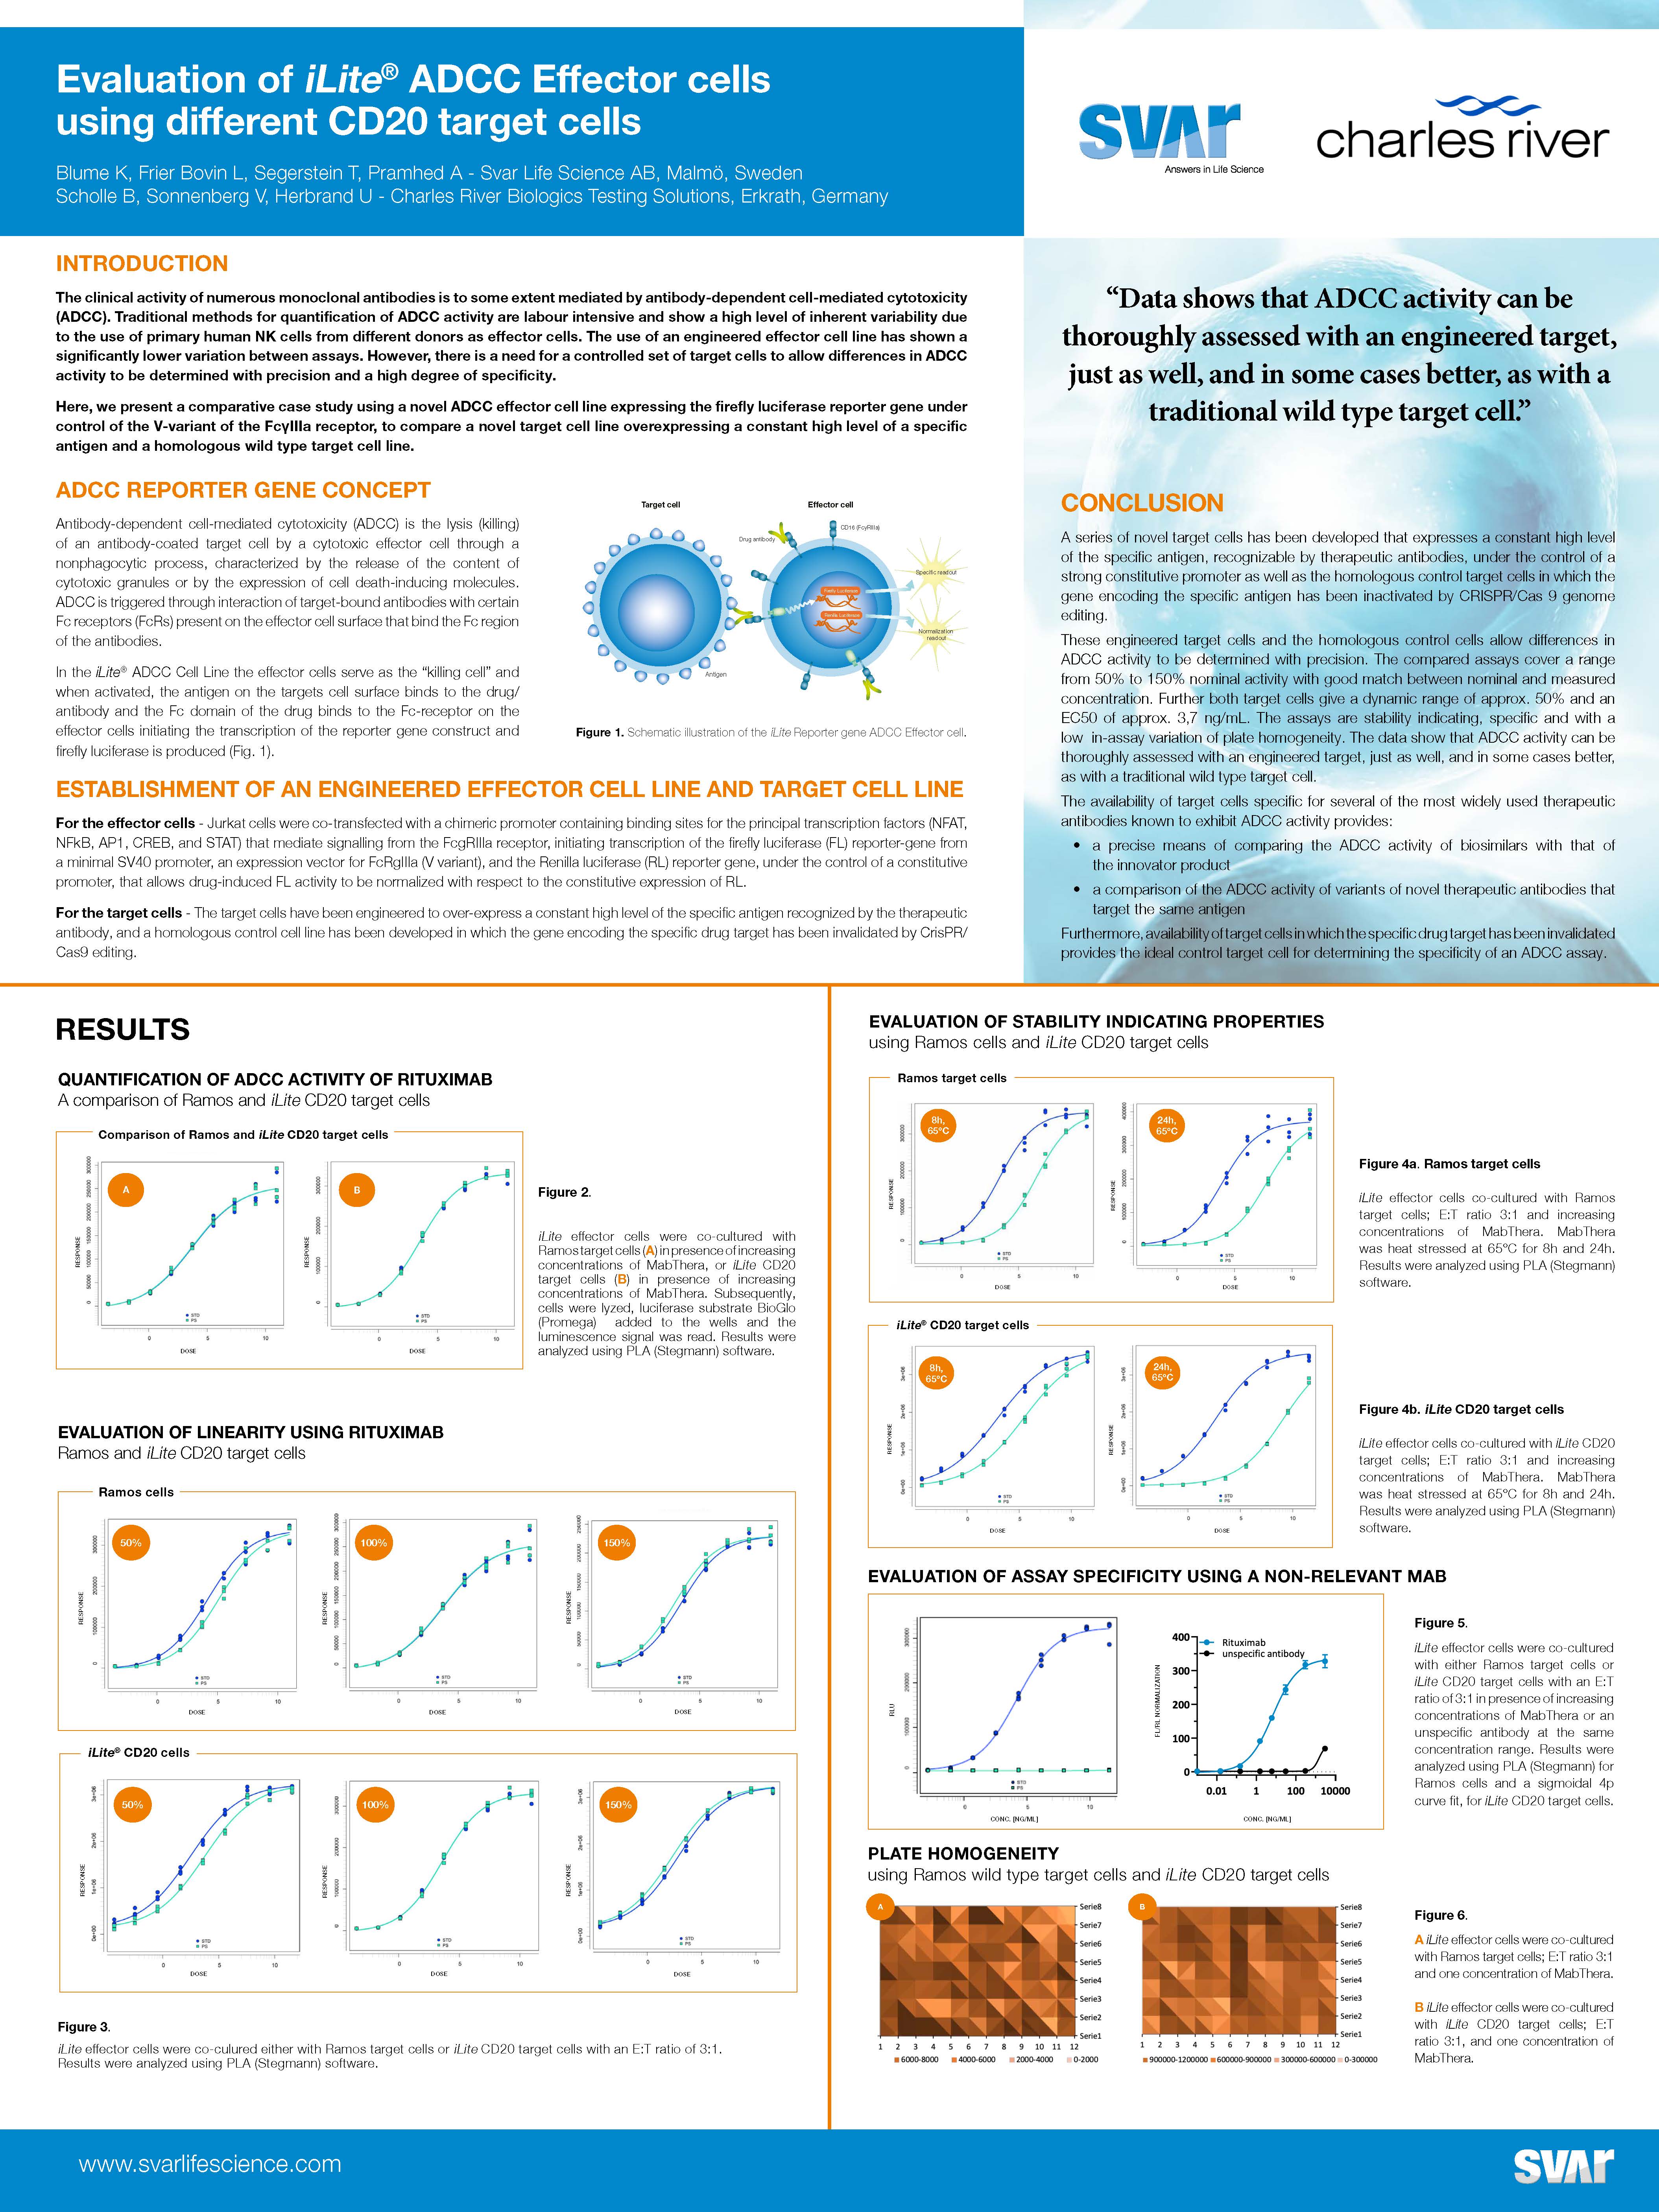 Scientific Poster - Evaluation of iLite® ADCC Effector cells using different CD20 target cells